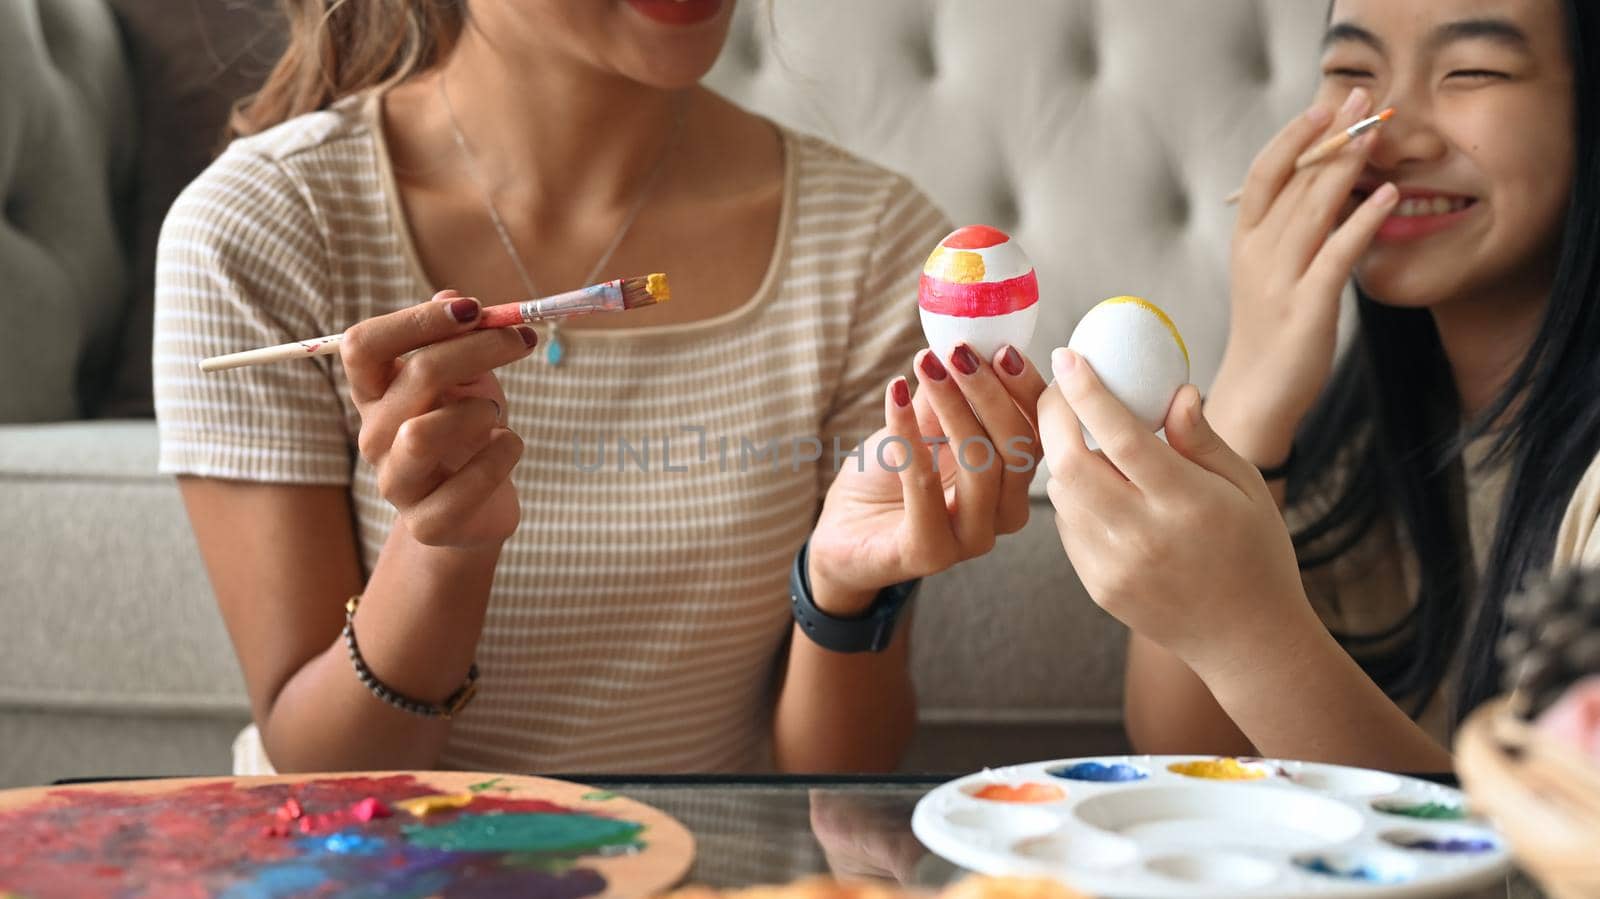 Cheerful Asian girl painting Easter eggs while enjoying decorating with mother. Easter holidays and people concept. by prathanchorruangsak